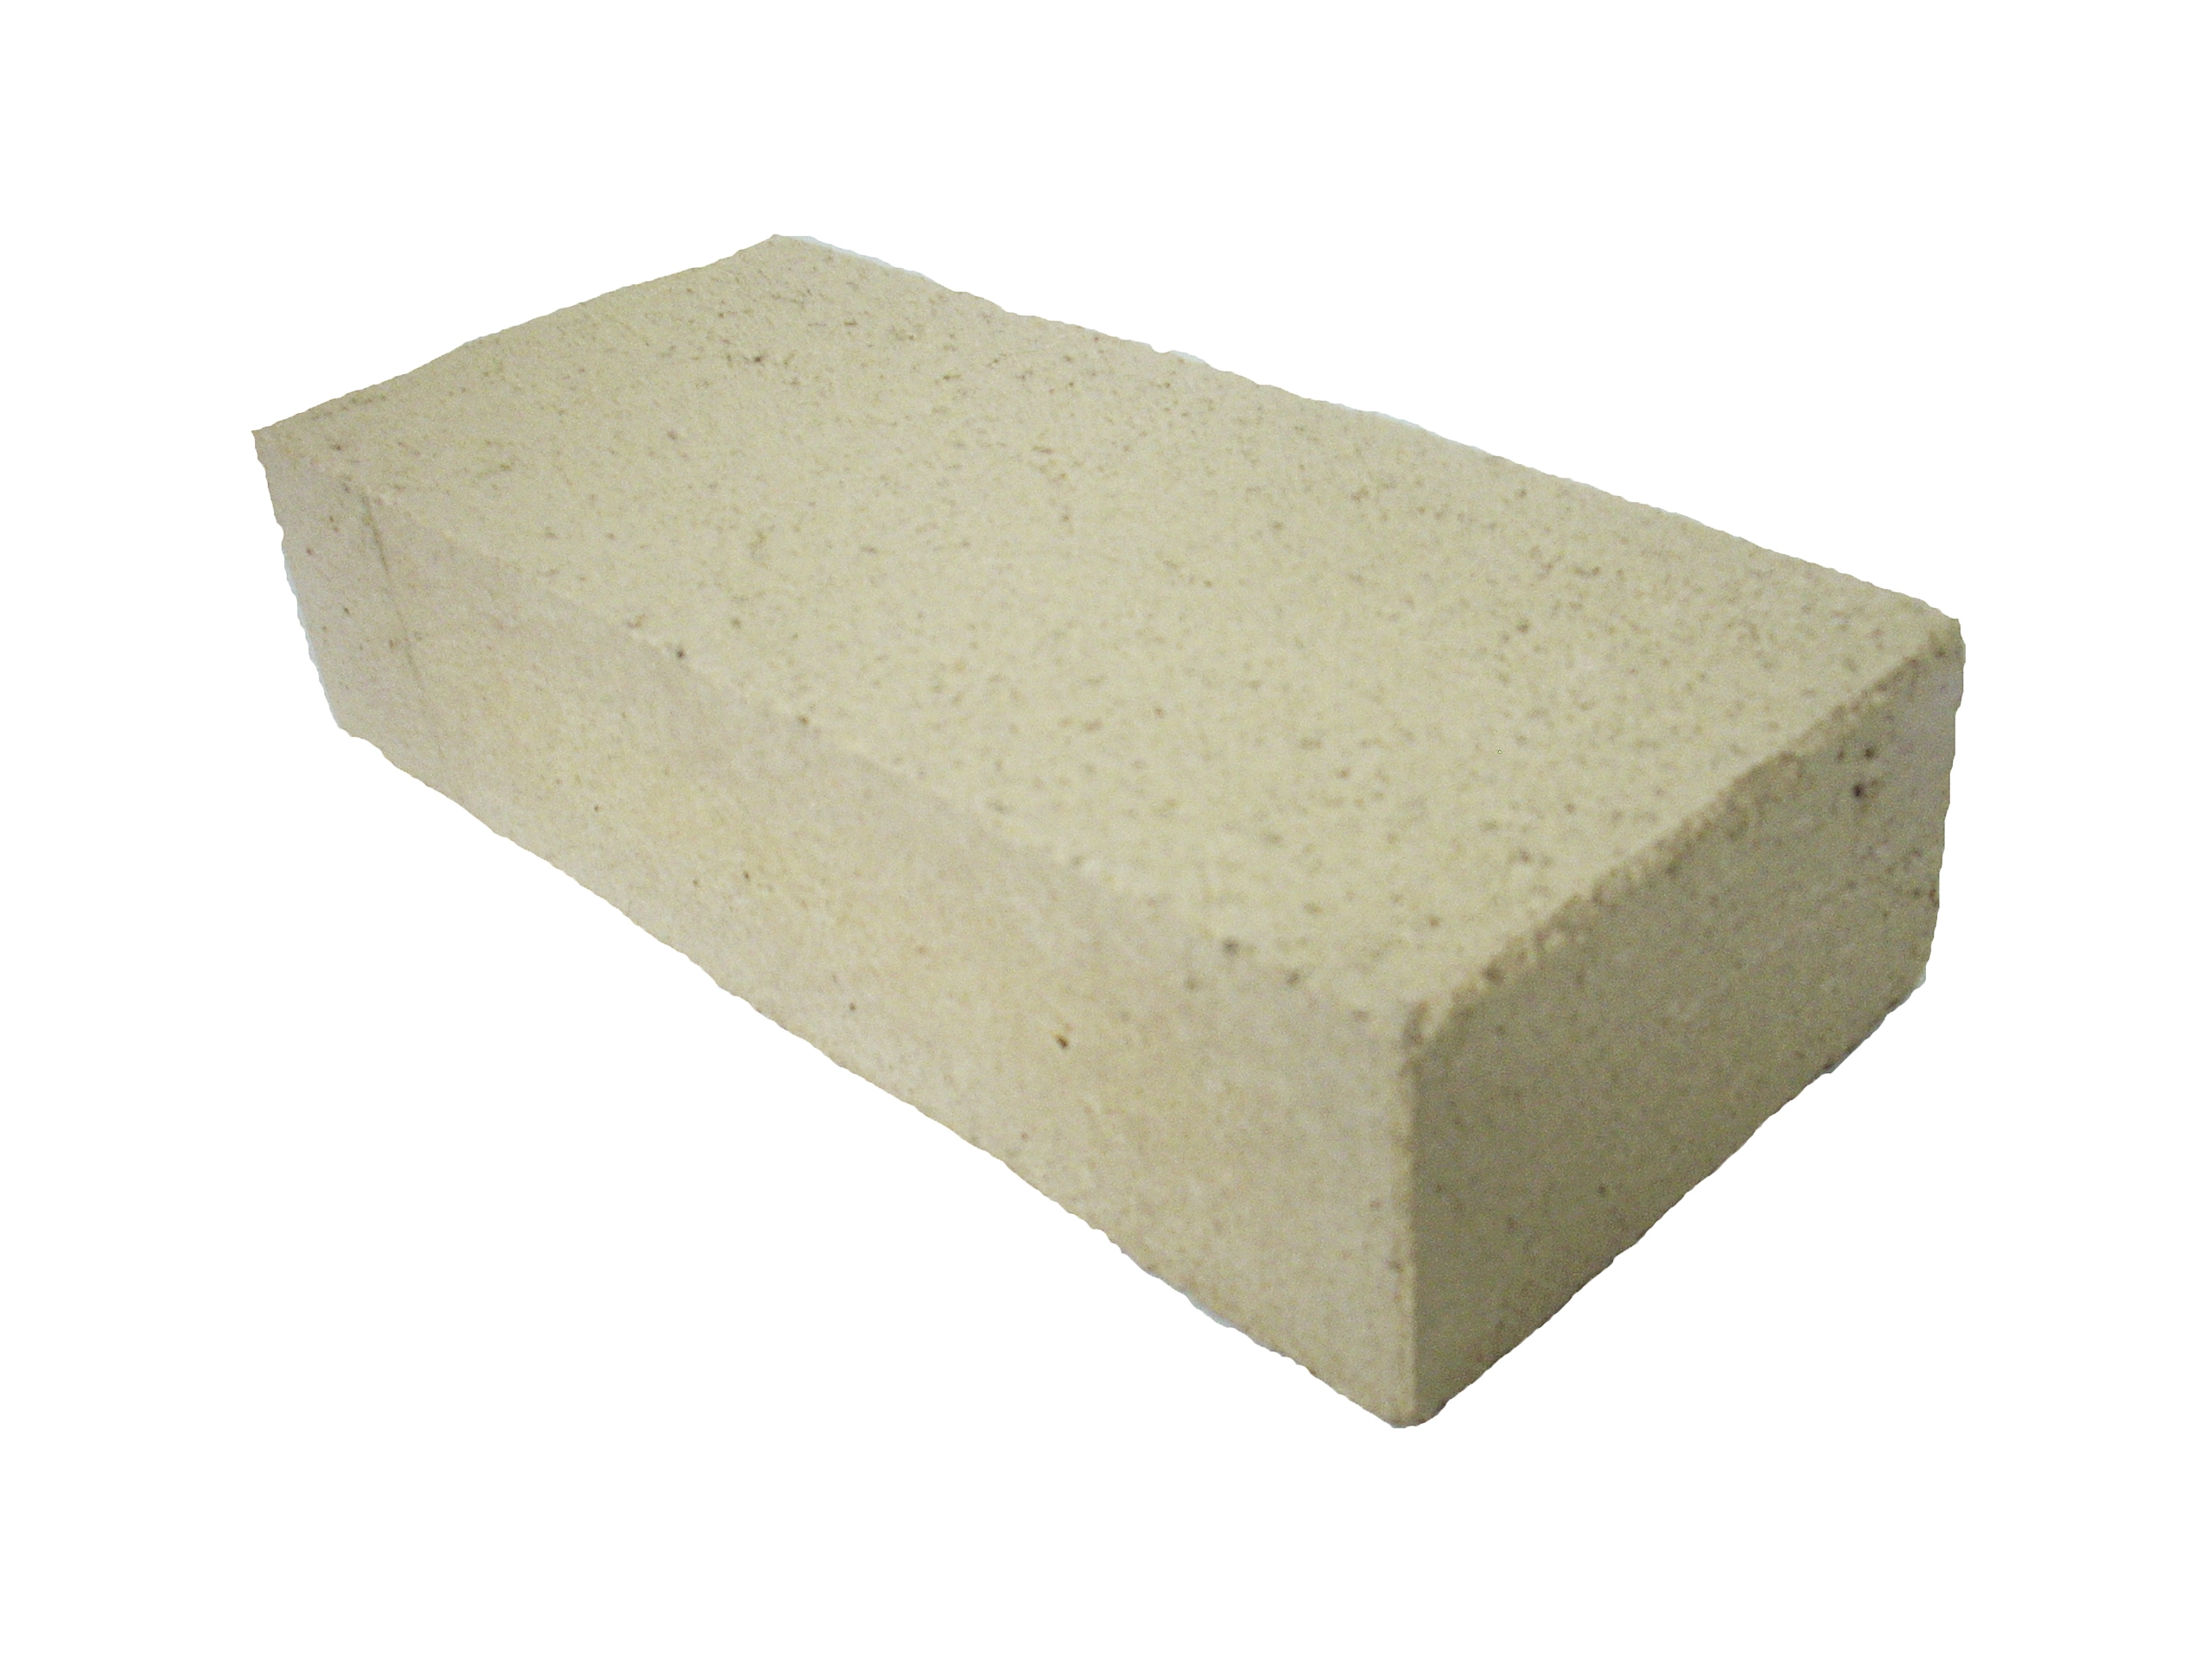 GIRtech Usm-2 Heavy Duty Fire Brick 2760F Pack of 2 Fire Bricks for Construction and Internal Lining Domestic Heating Units Fireplaces, Steel